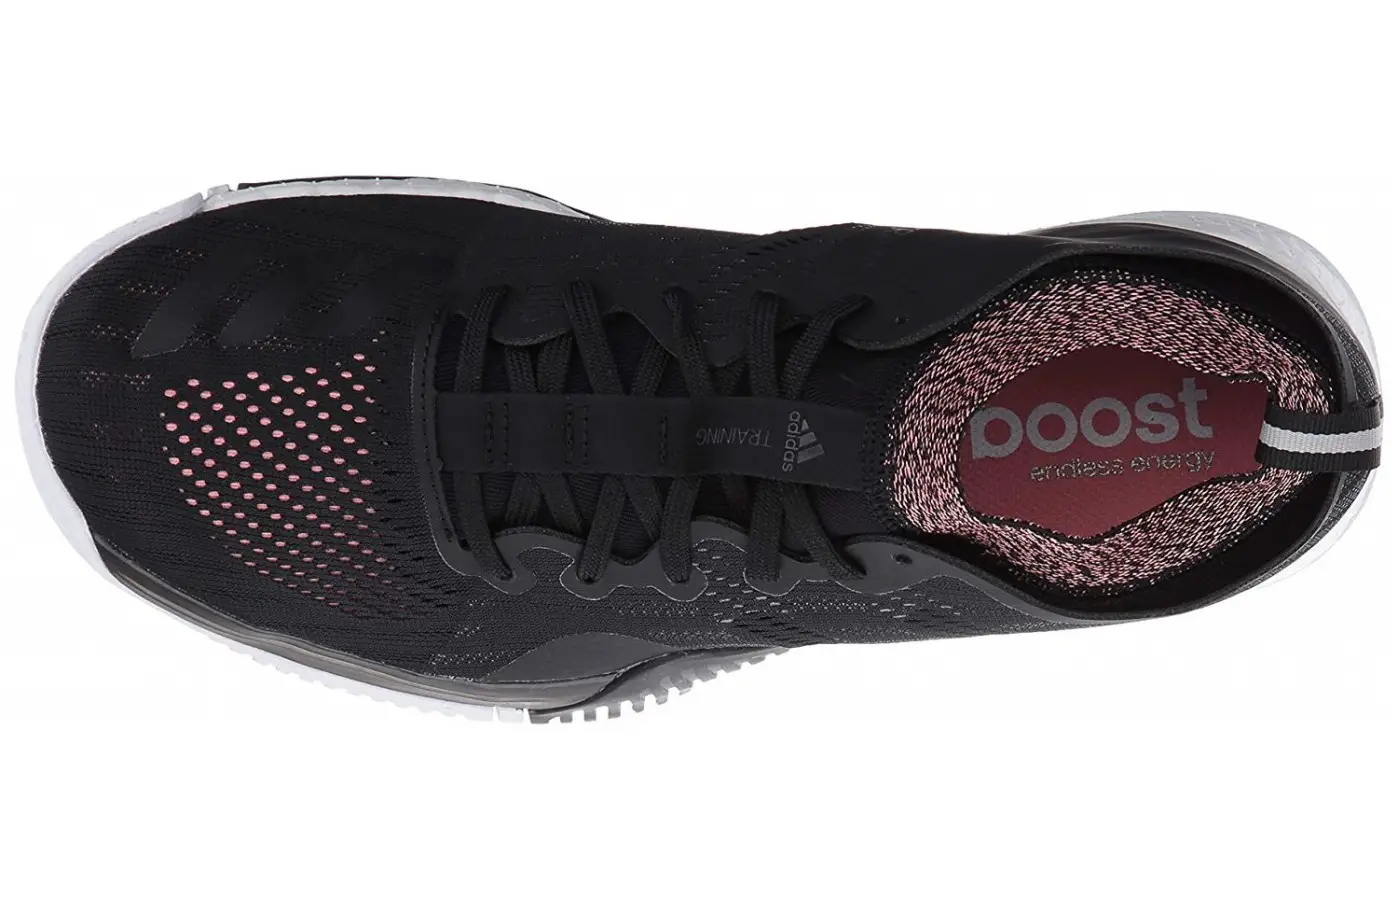 Adidas’s patented Boost technology is used in the construction of the CrazyTrain Elite midsole. 